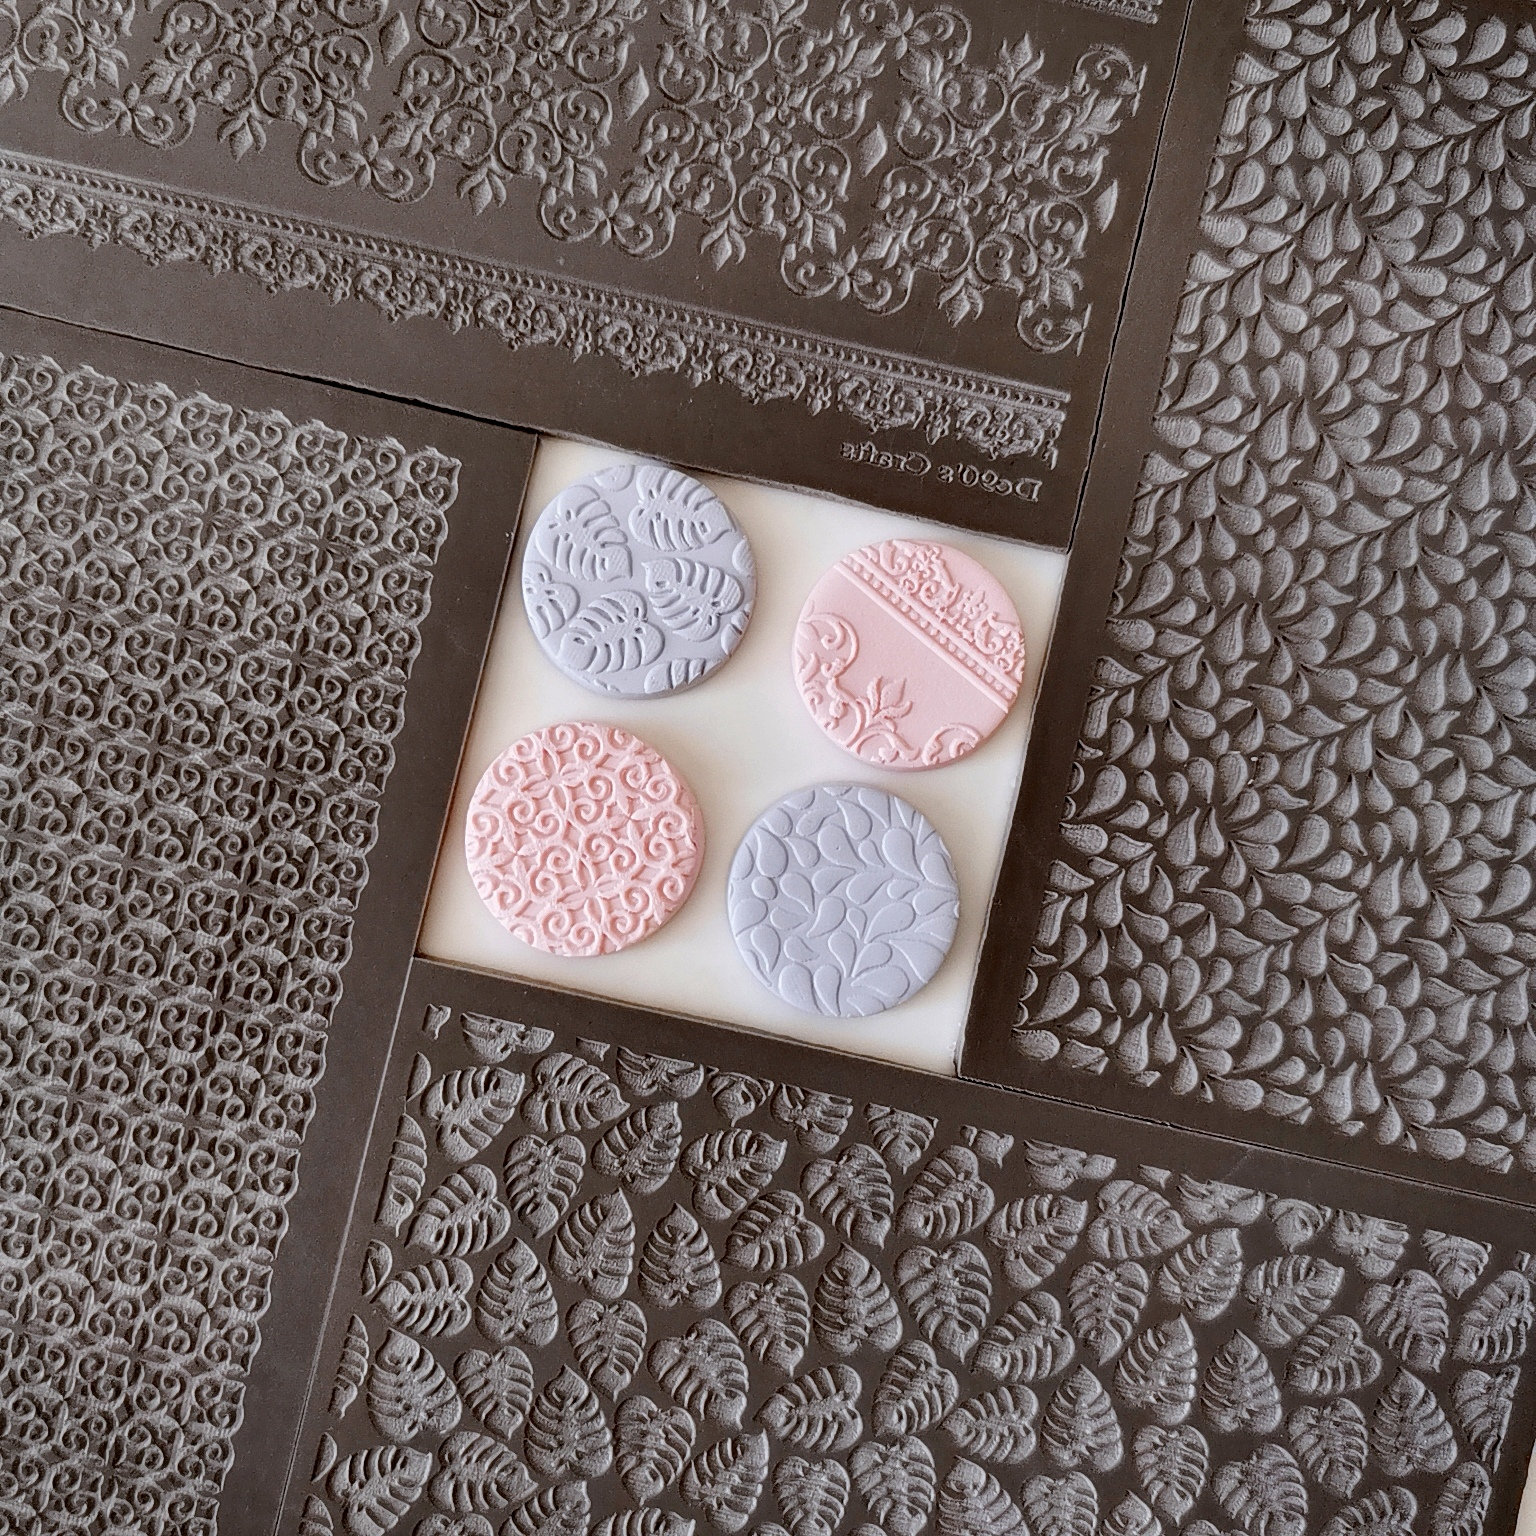  KEOKER Polymer Clay Texture Sheets Set, Clay Earring